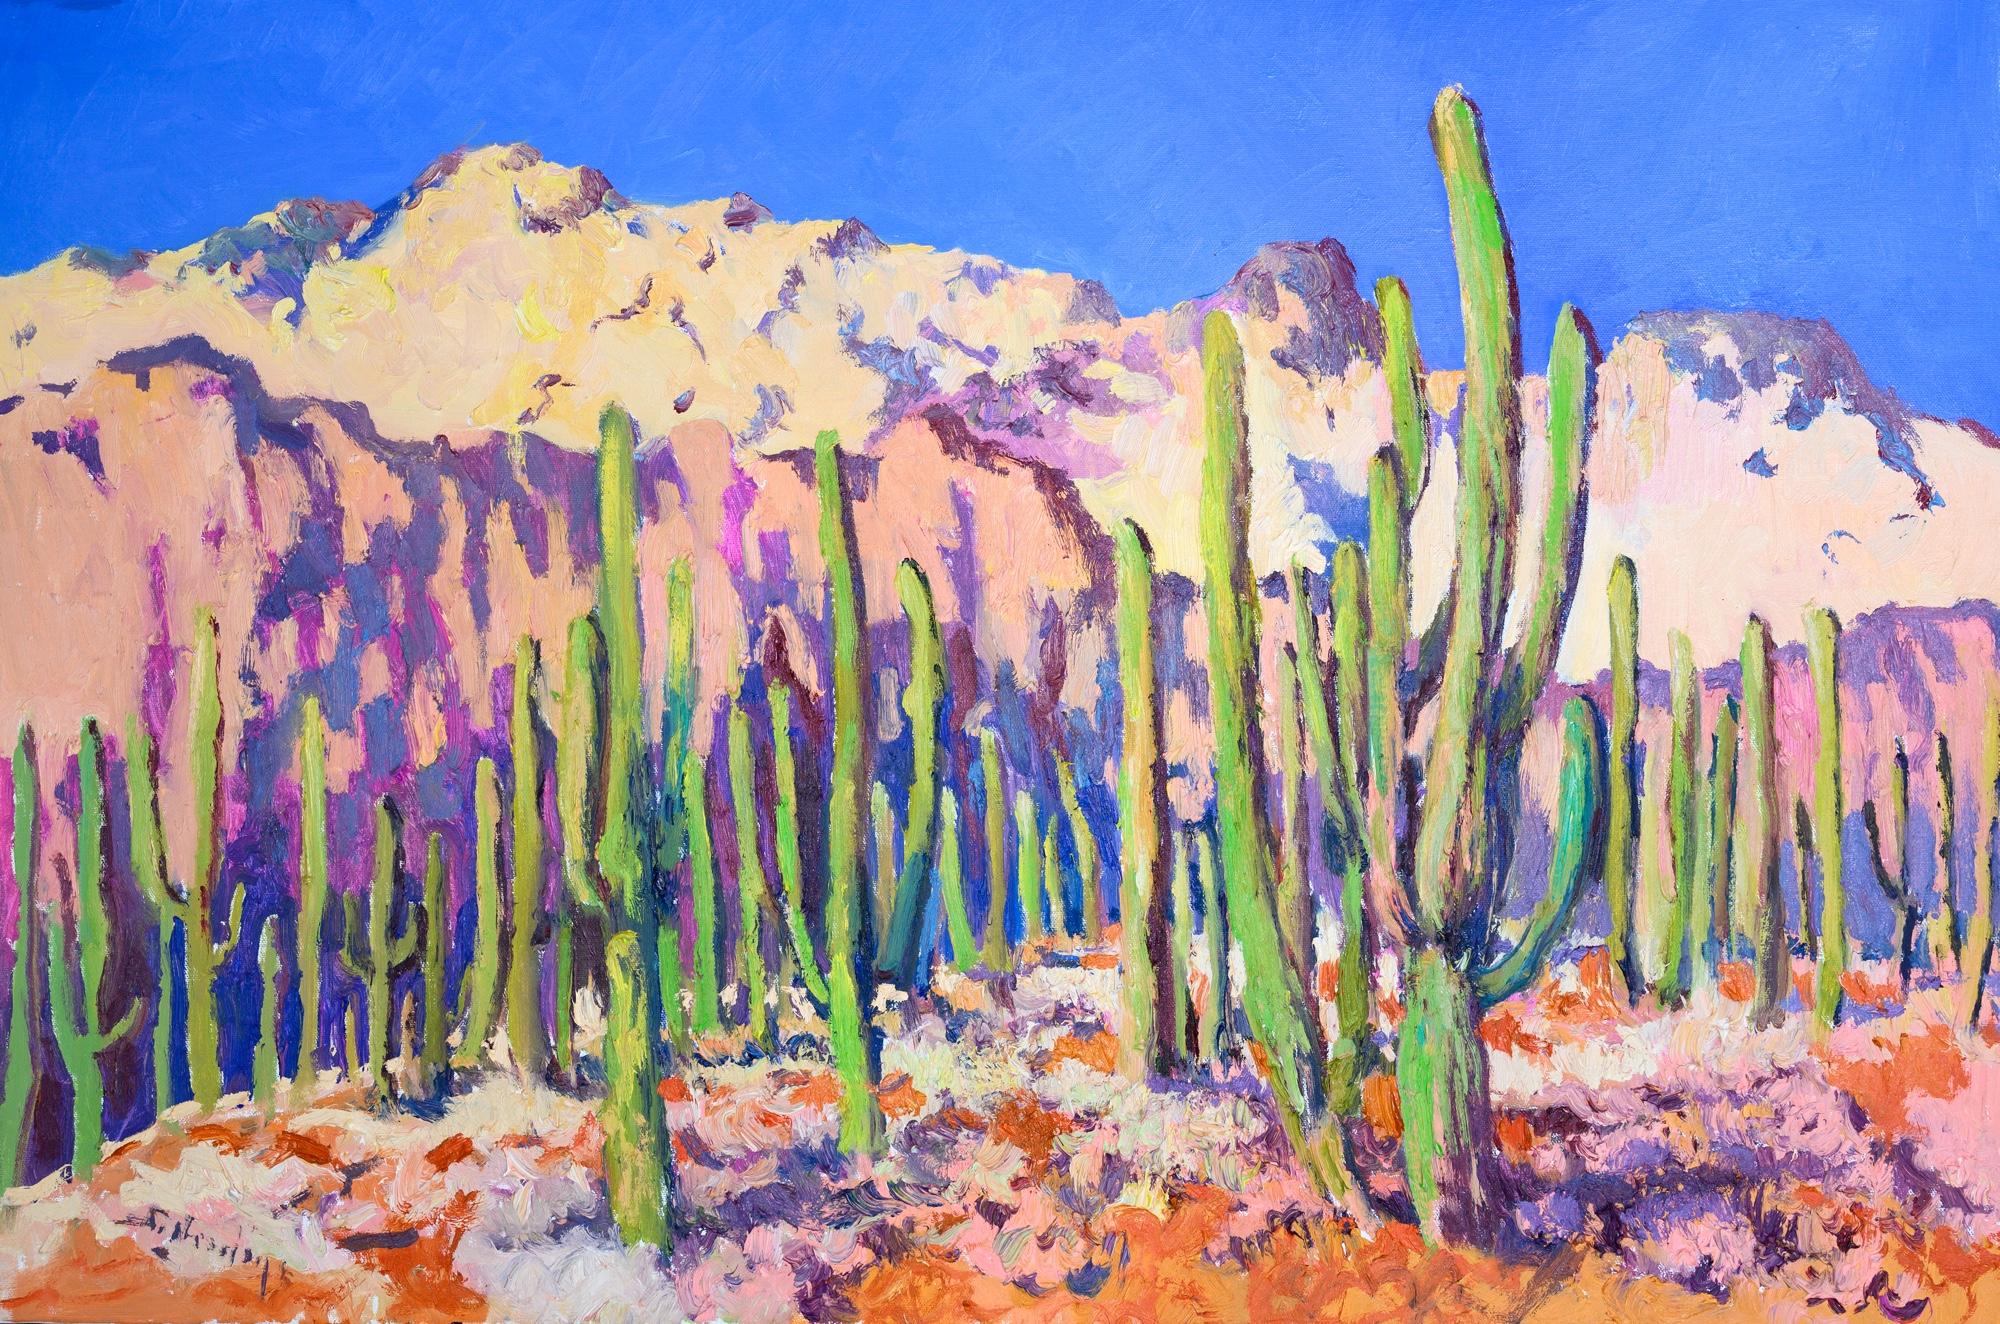 Suren Nersisyan Landscape Painting - The Land of Saguaro Cactuses, Oil Painting